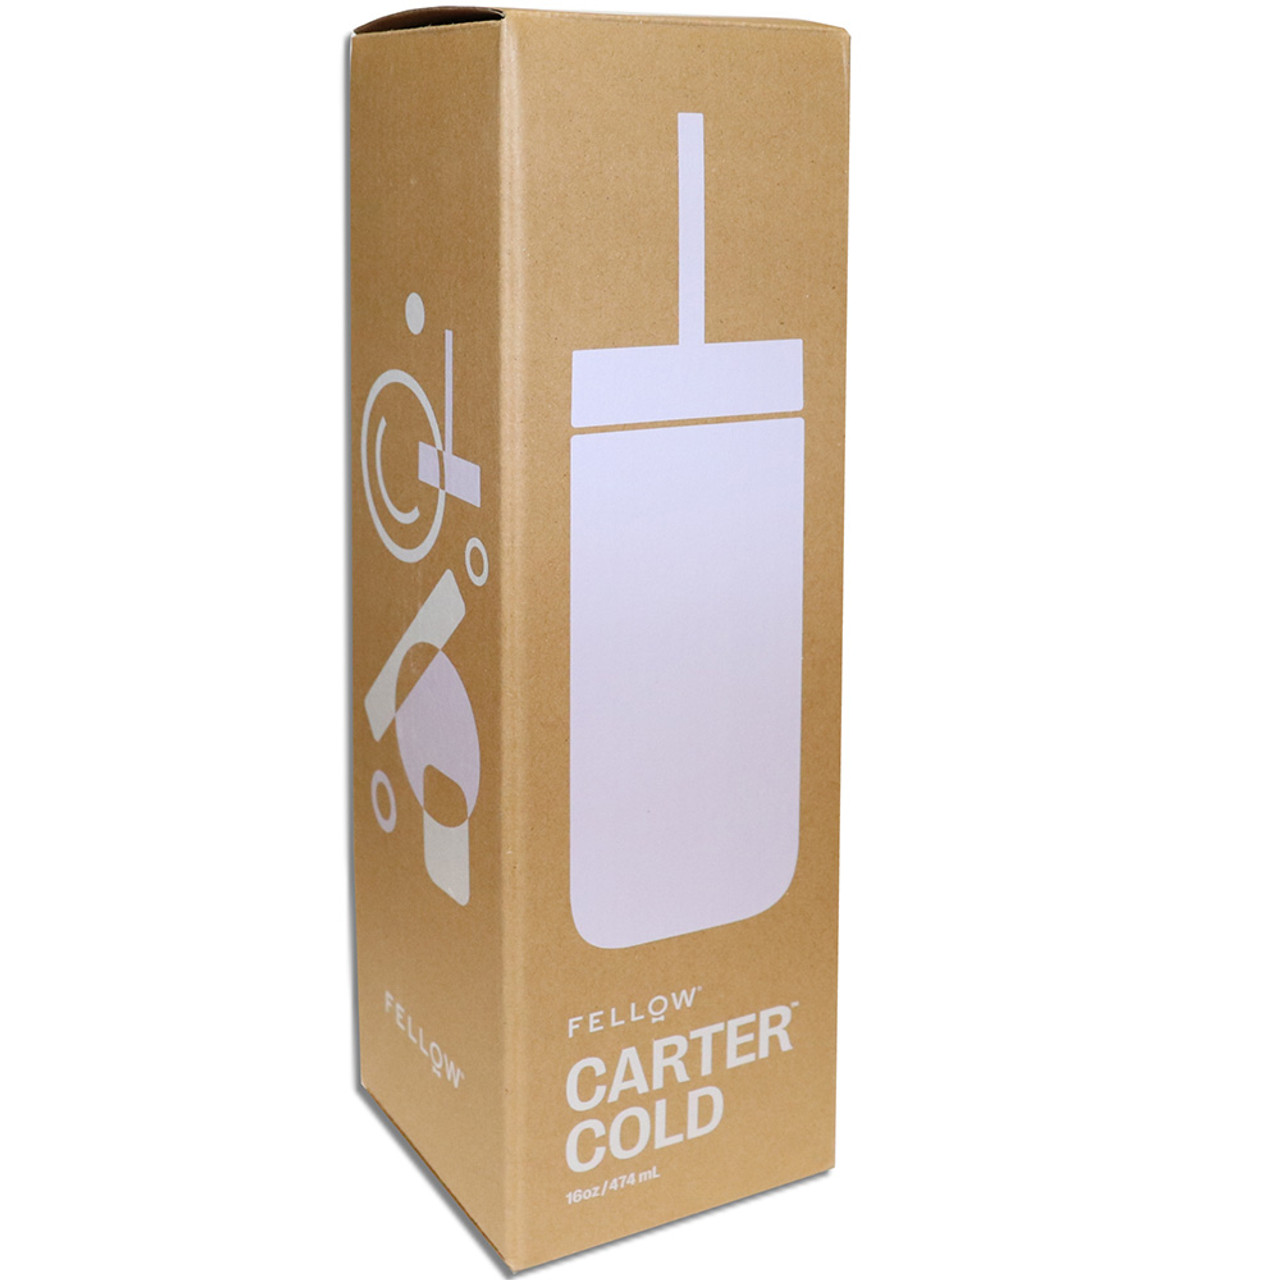 Carter Cold Tumbler - SMALL PACKAGES